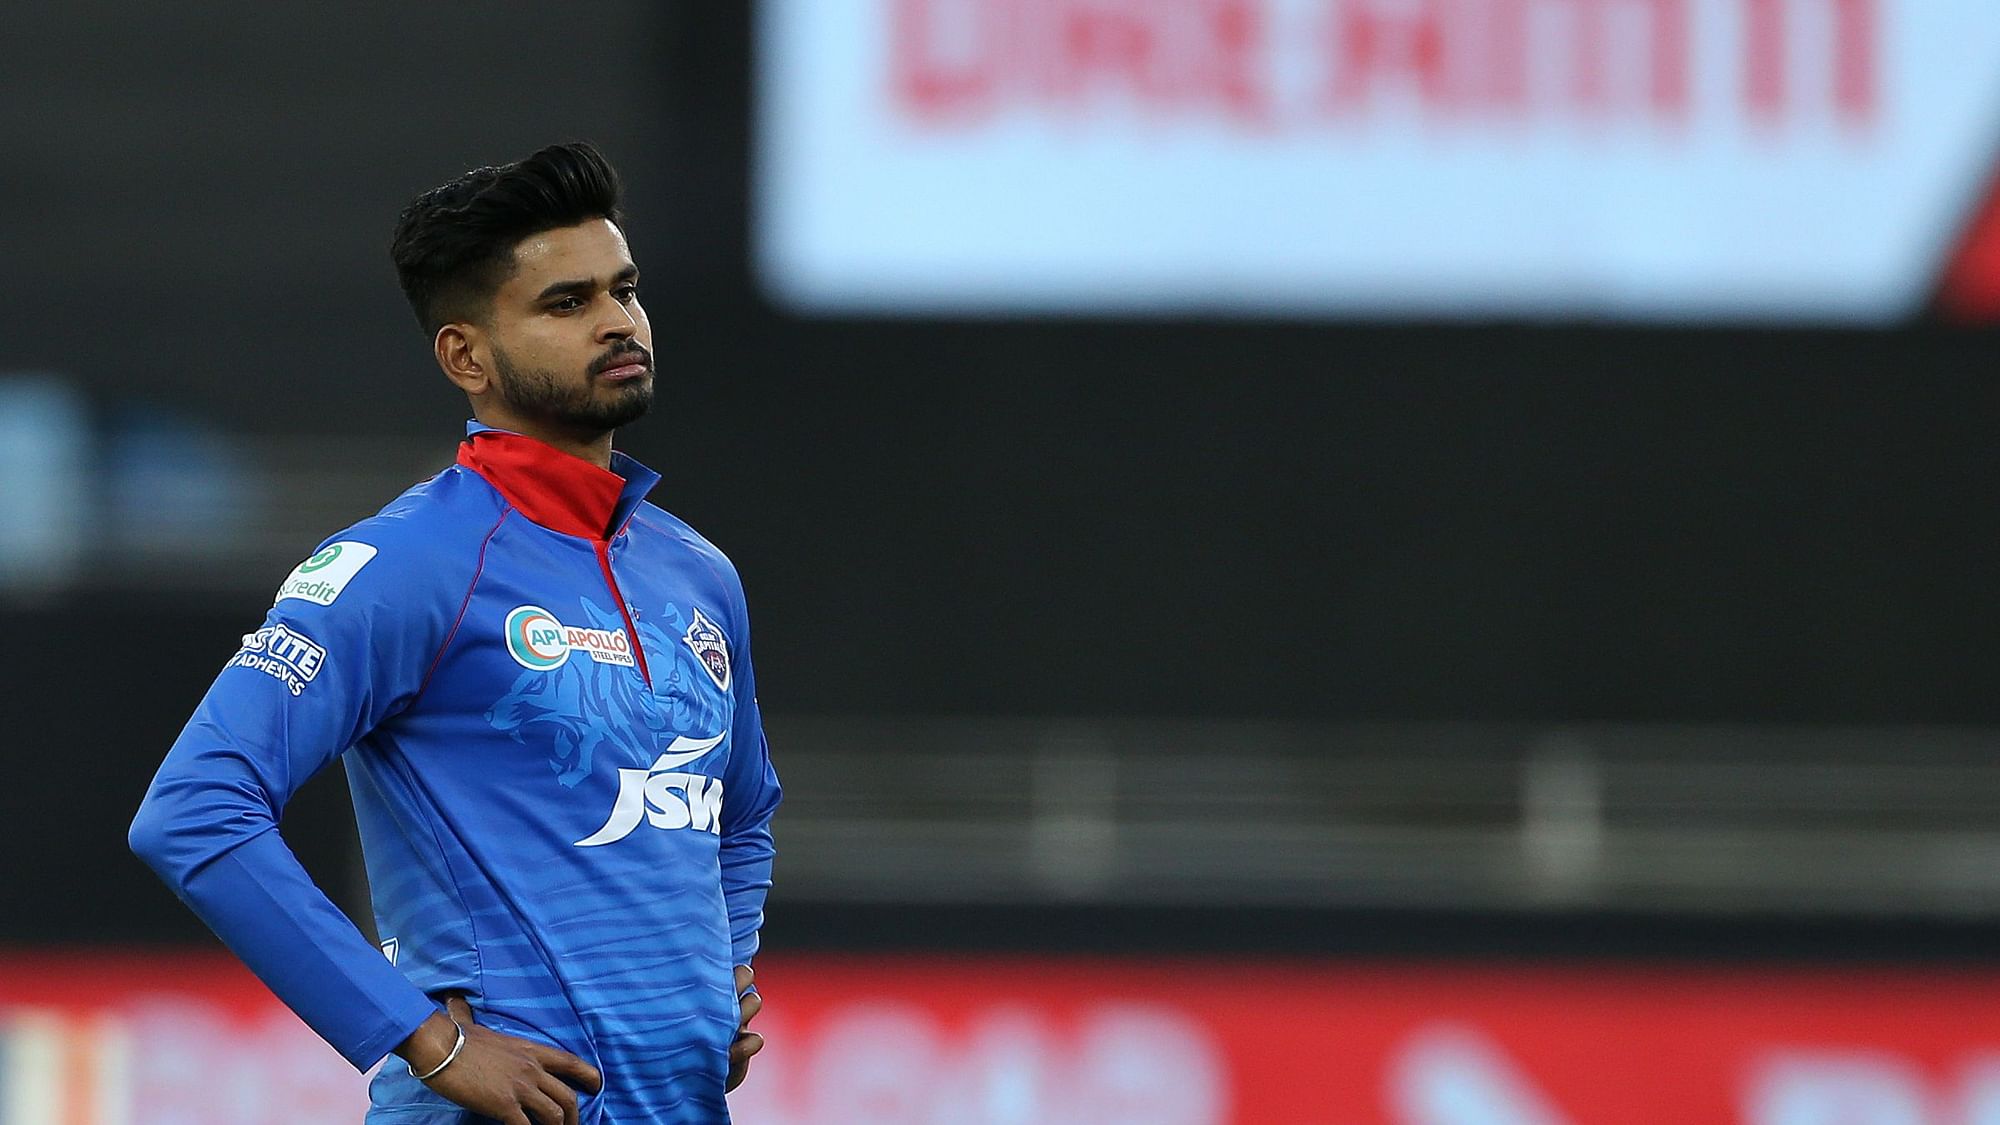 Delhi Capitals’ captain Shreyas Iyer admitted they lost the match against SRH in the first 6 overs itself.